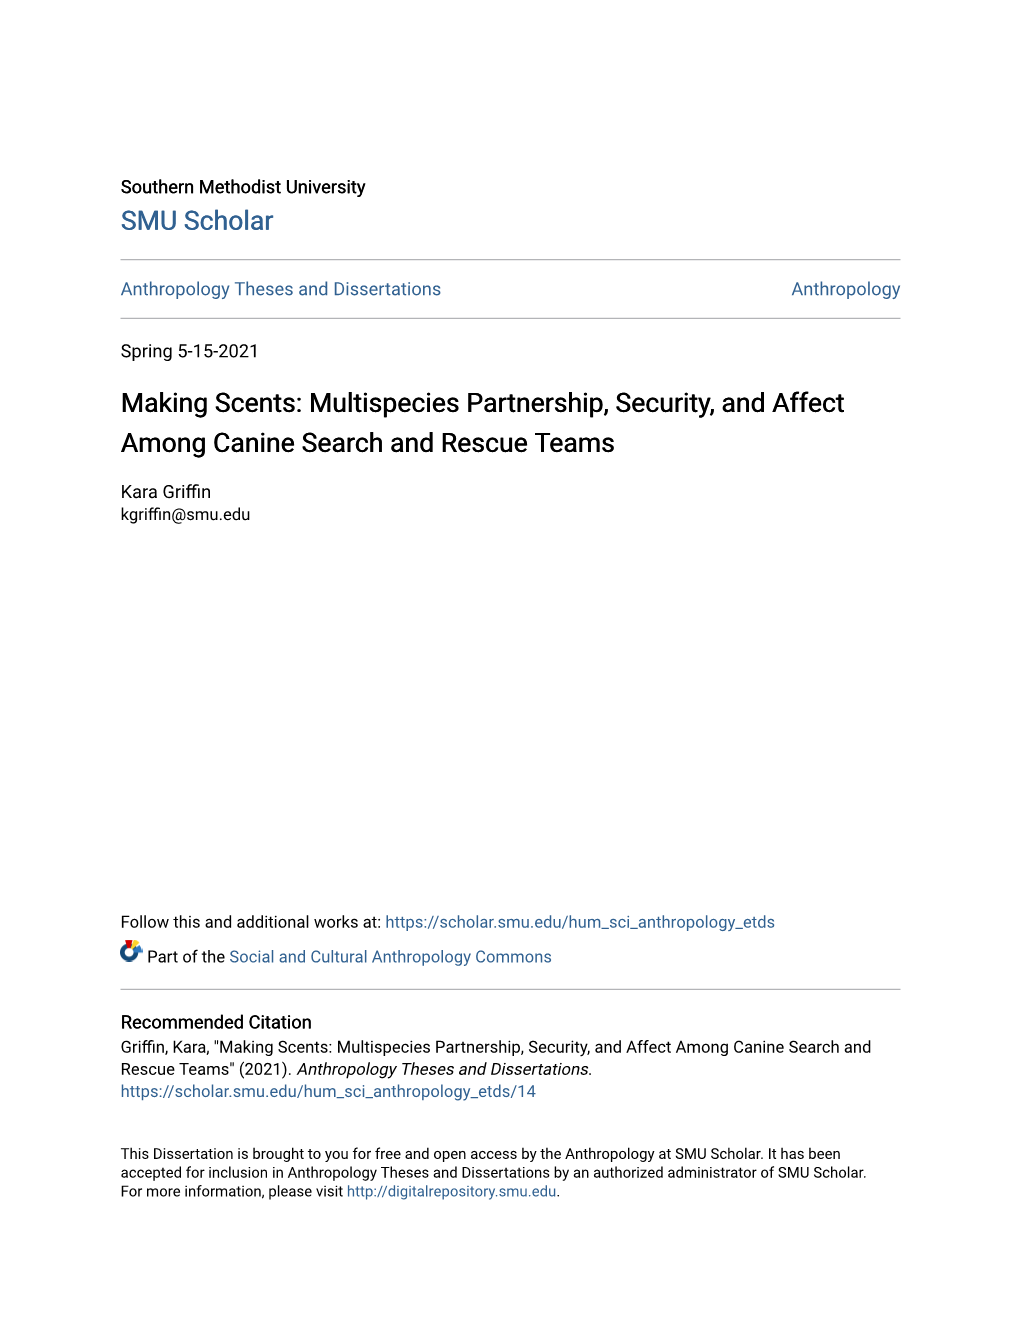 Multispecies Partnership, Security, and Affect Among Canine Search and Rescue Teams